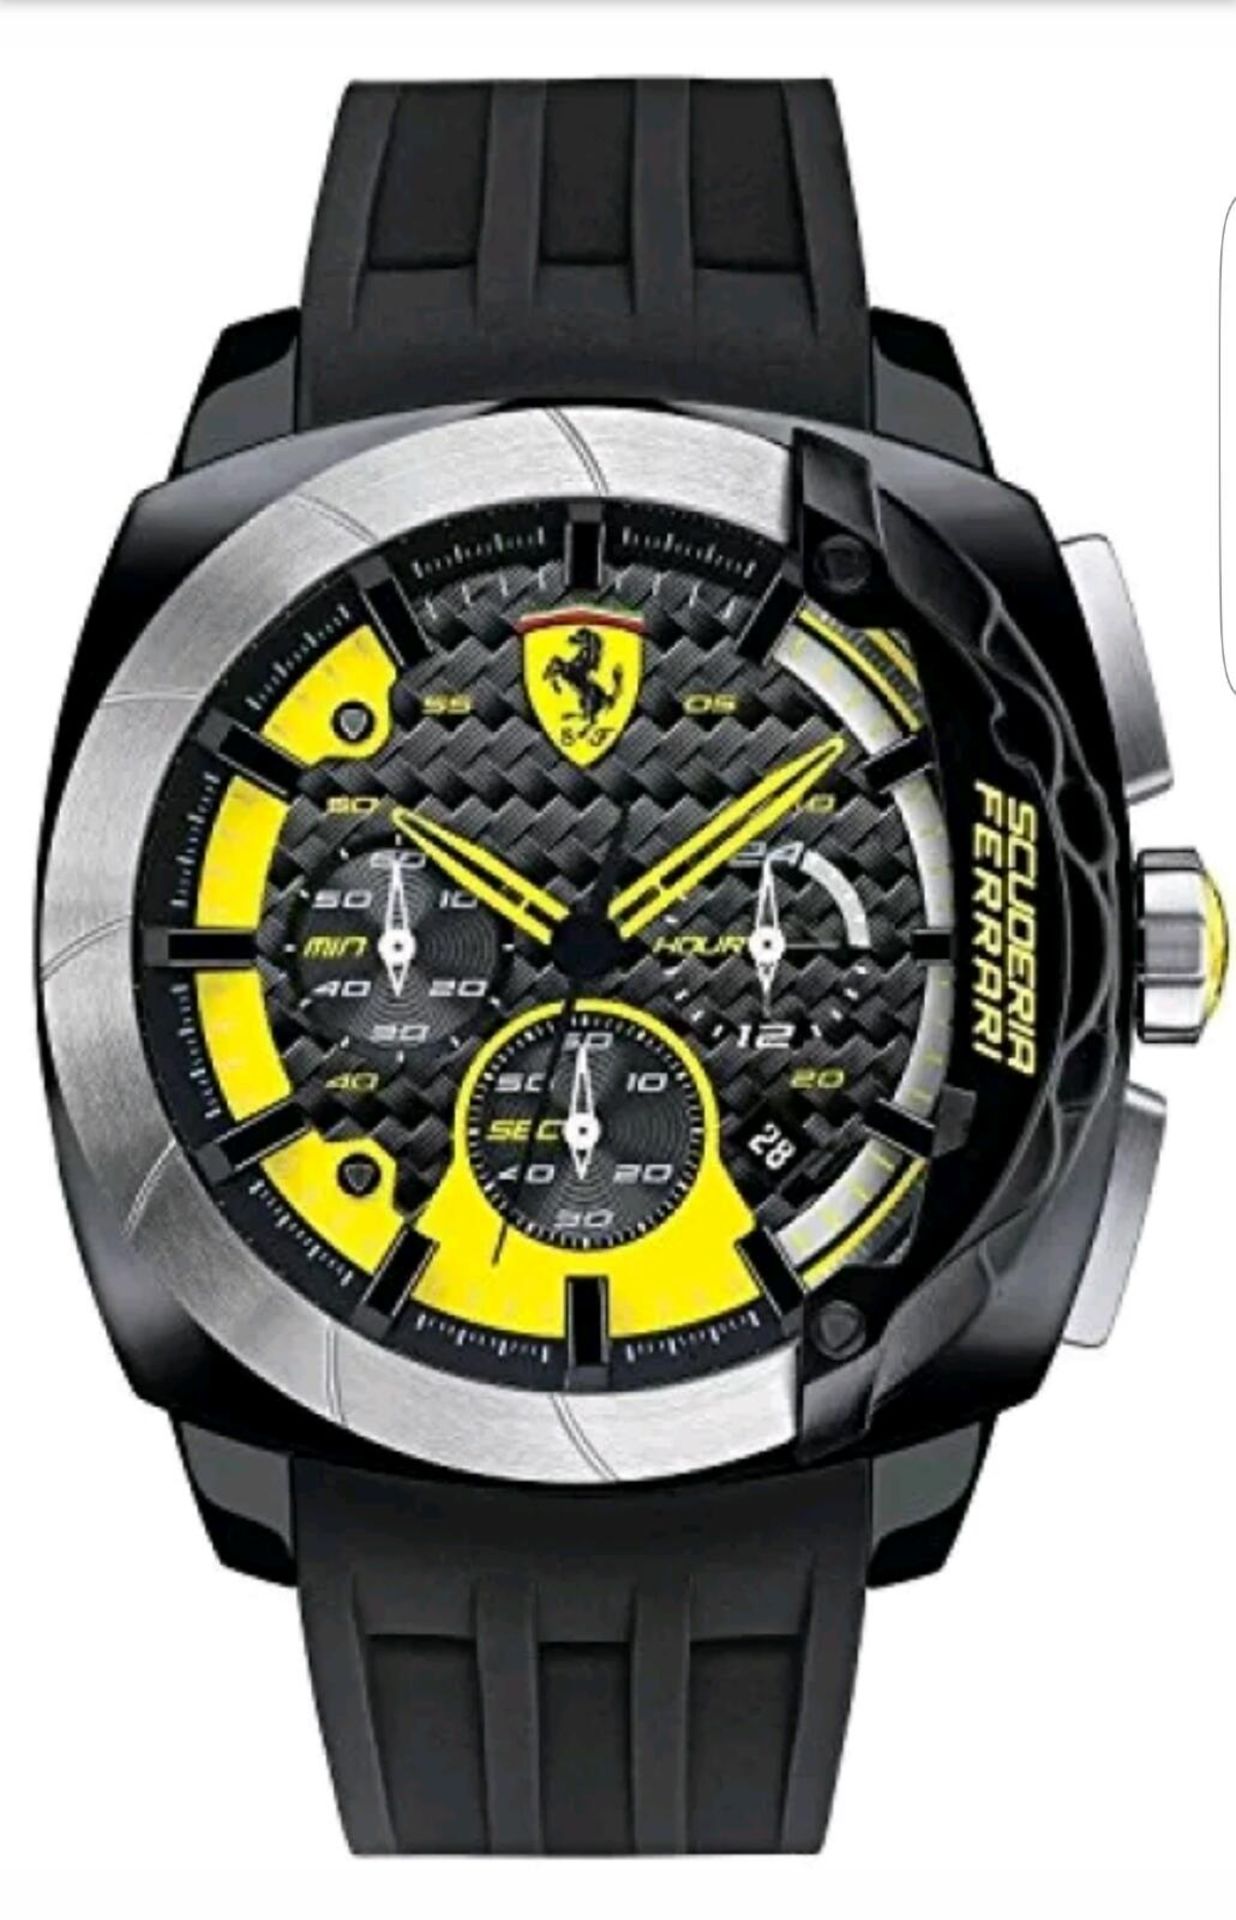 BRAND NEW SCUDERIA FERRARI MENS WATCH 0830206, COMPLETE WITH ORIGINAL BOX AND PAPERS - RRP £349